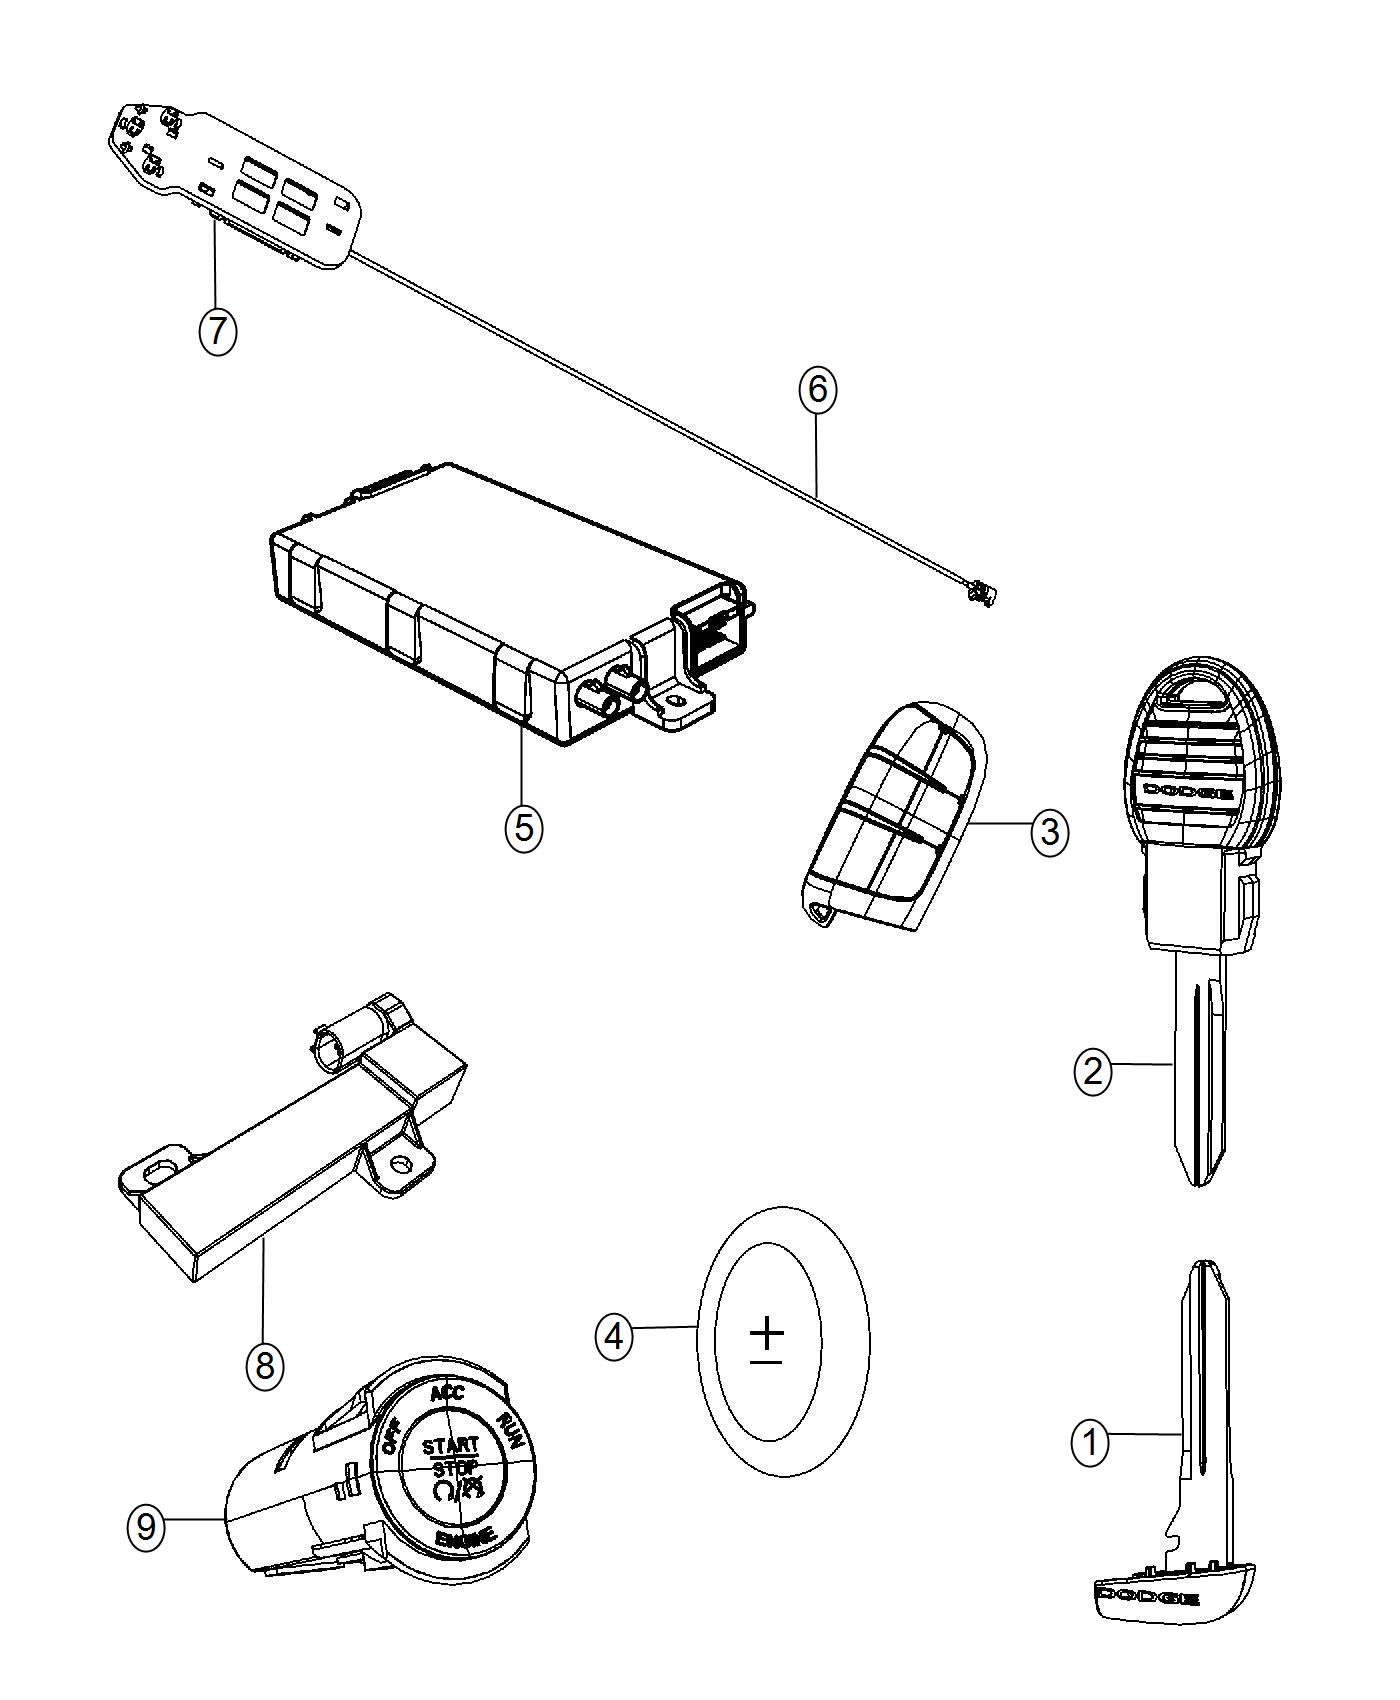 Receiver Modules, Key, and Key Fobs. Diagram